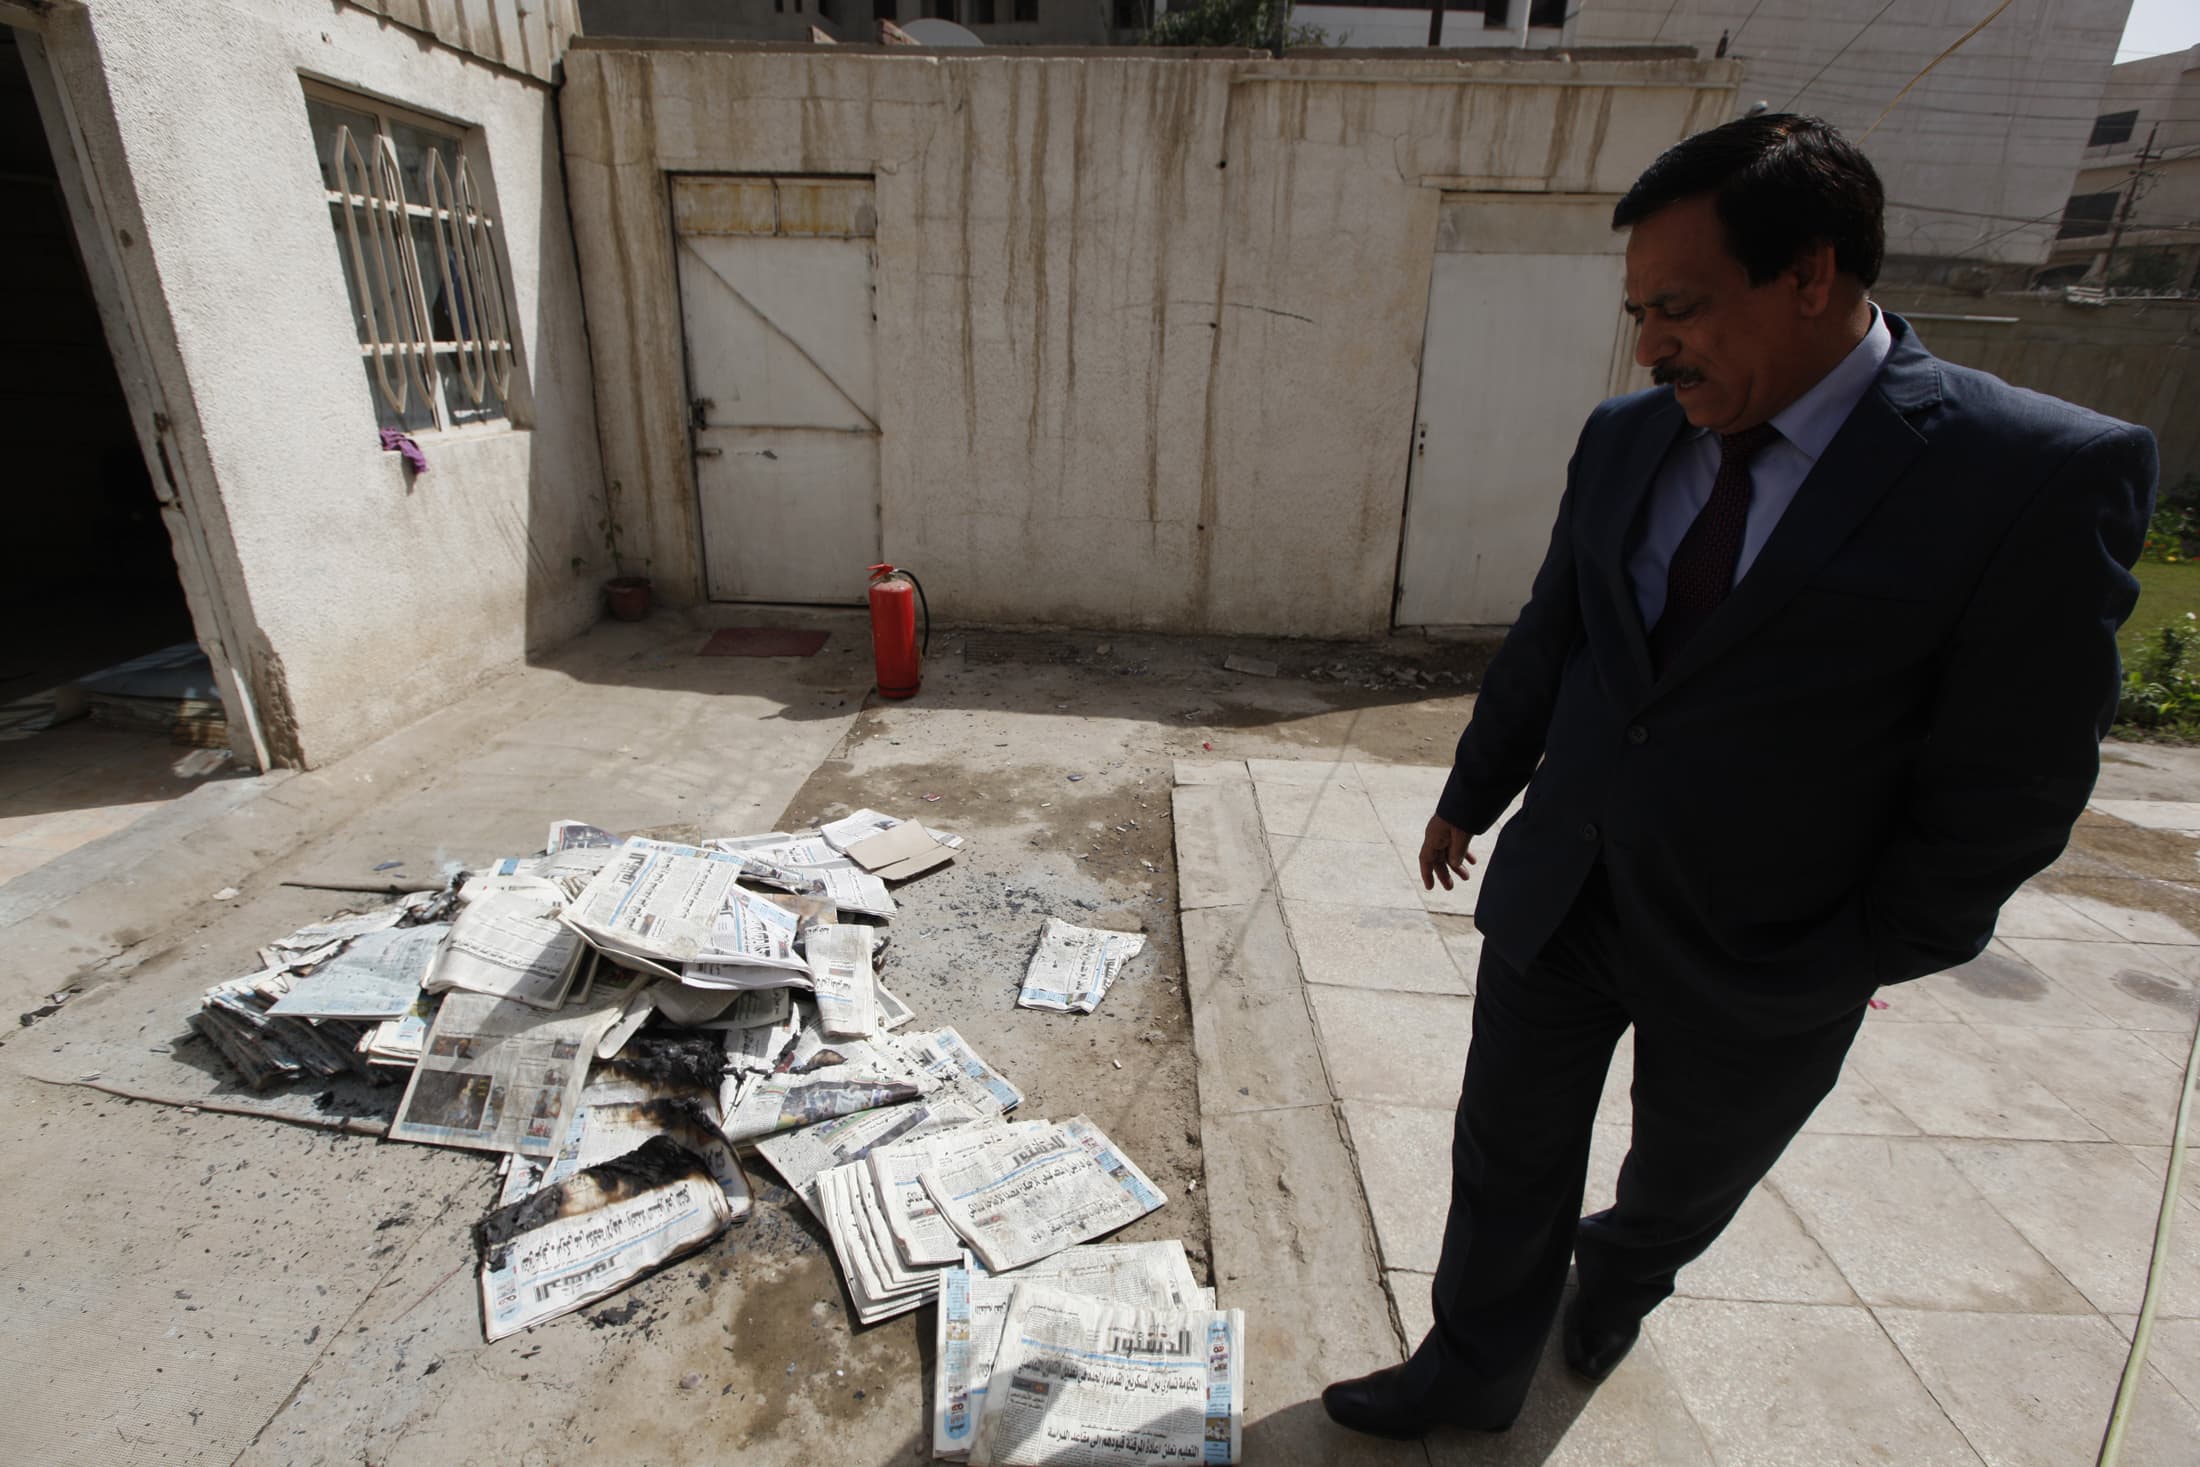 An Iraqi journalist walks past the archive newspapers burned after an attack by an armed group at Addustour newspaper's headquarters in Baghdad on 2 April 2013, REUTERS/Thaier al-Sudani